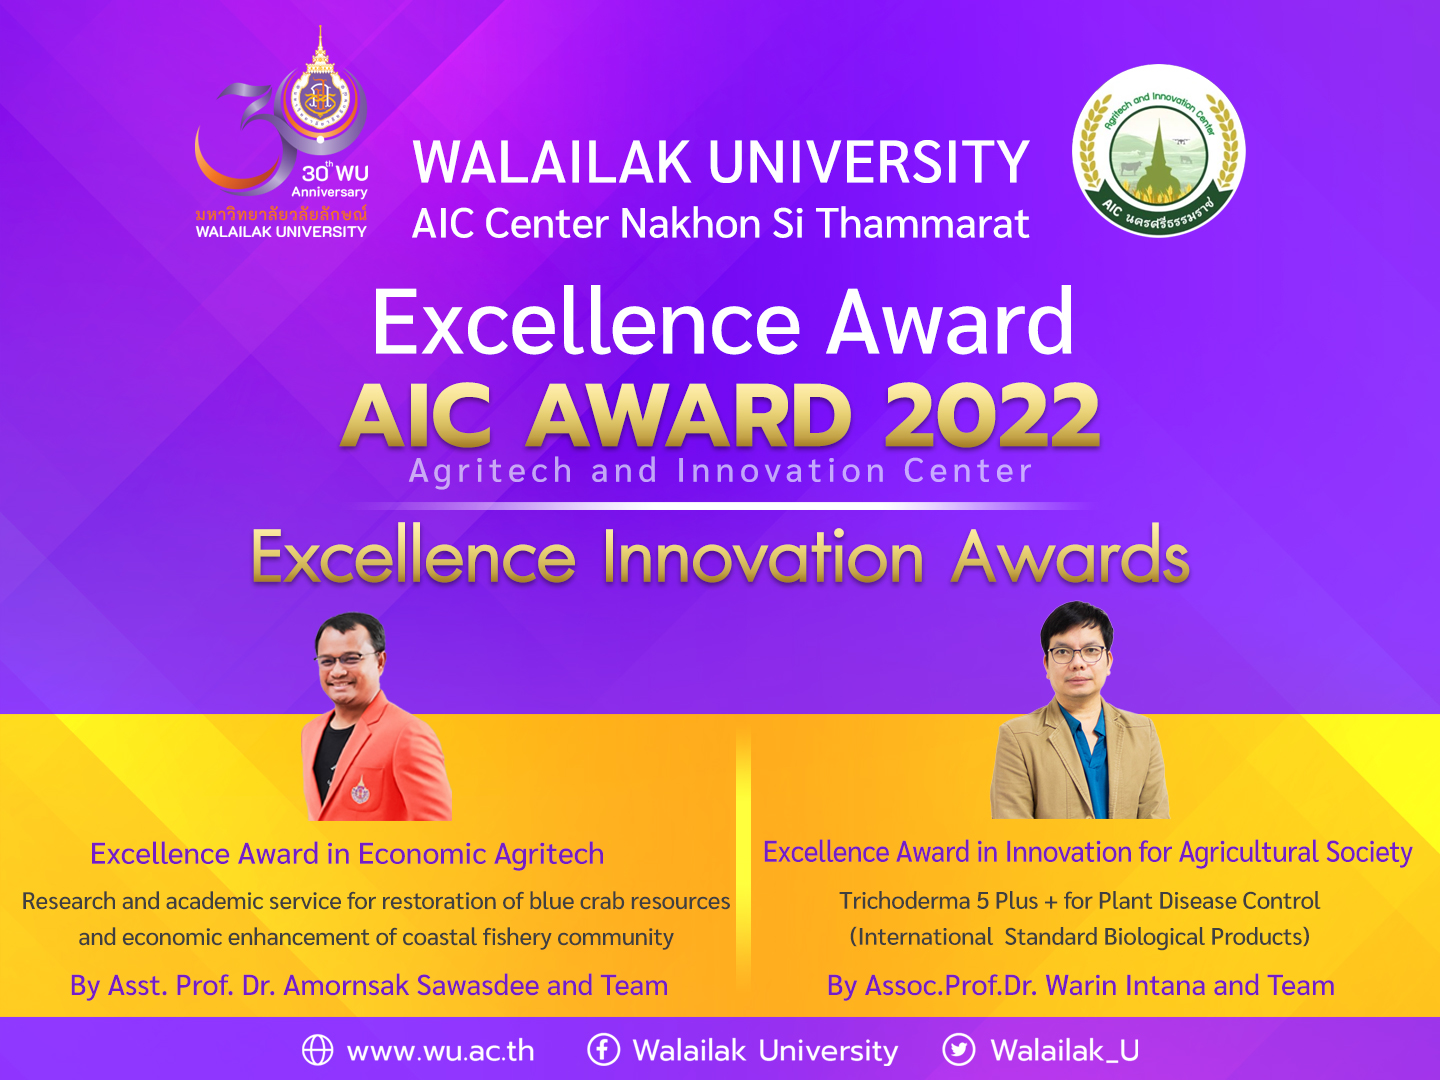 Walailak University’s Studies on Blue Crabs and Trichoderma 5 Plus, affiliated with AIC Center, Nakhon Si Thammarat, Win Two Innovation Excellence Awards in AIC Award 2022